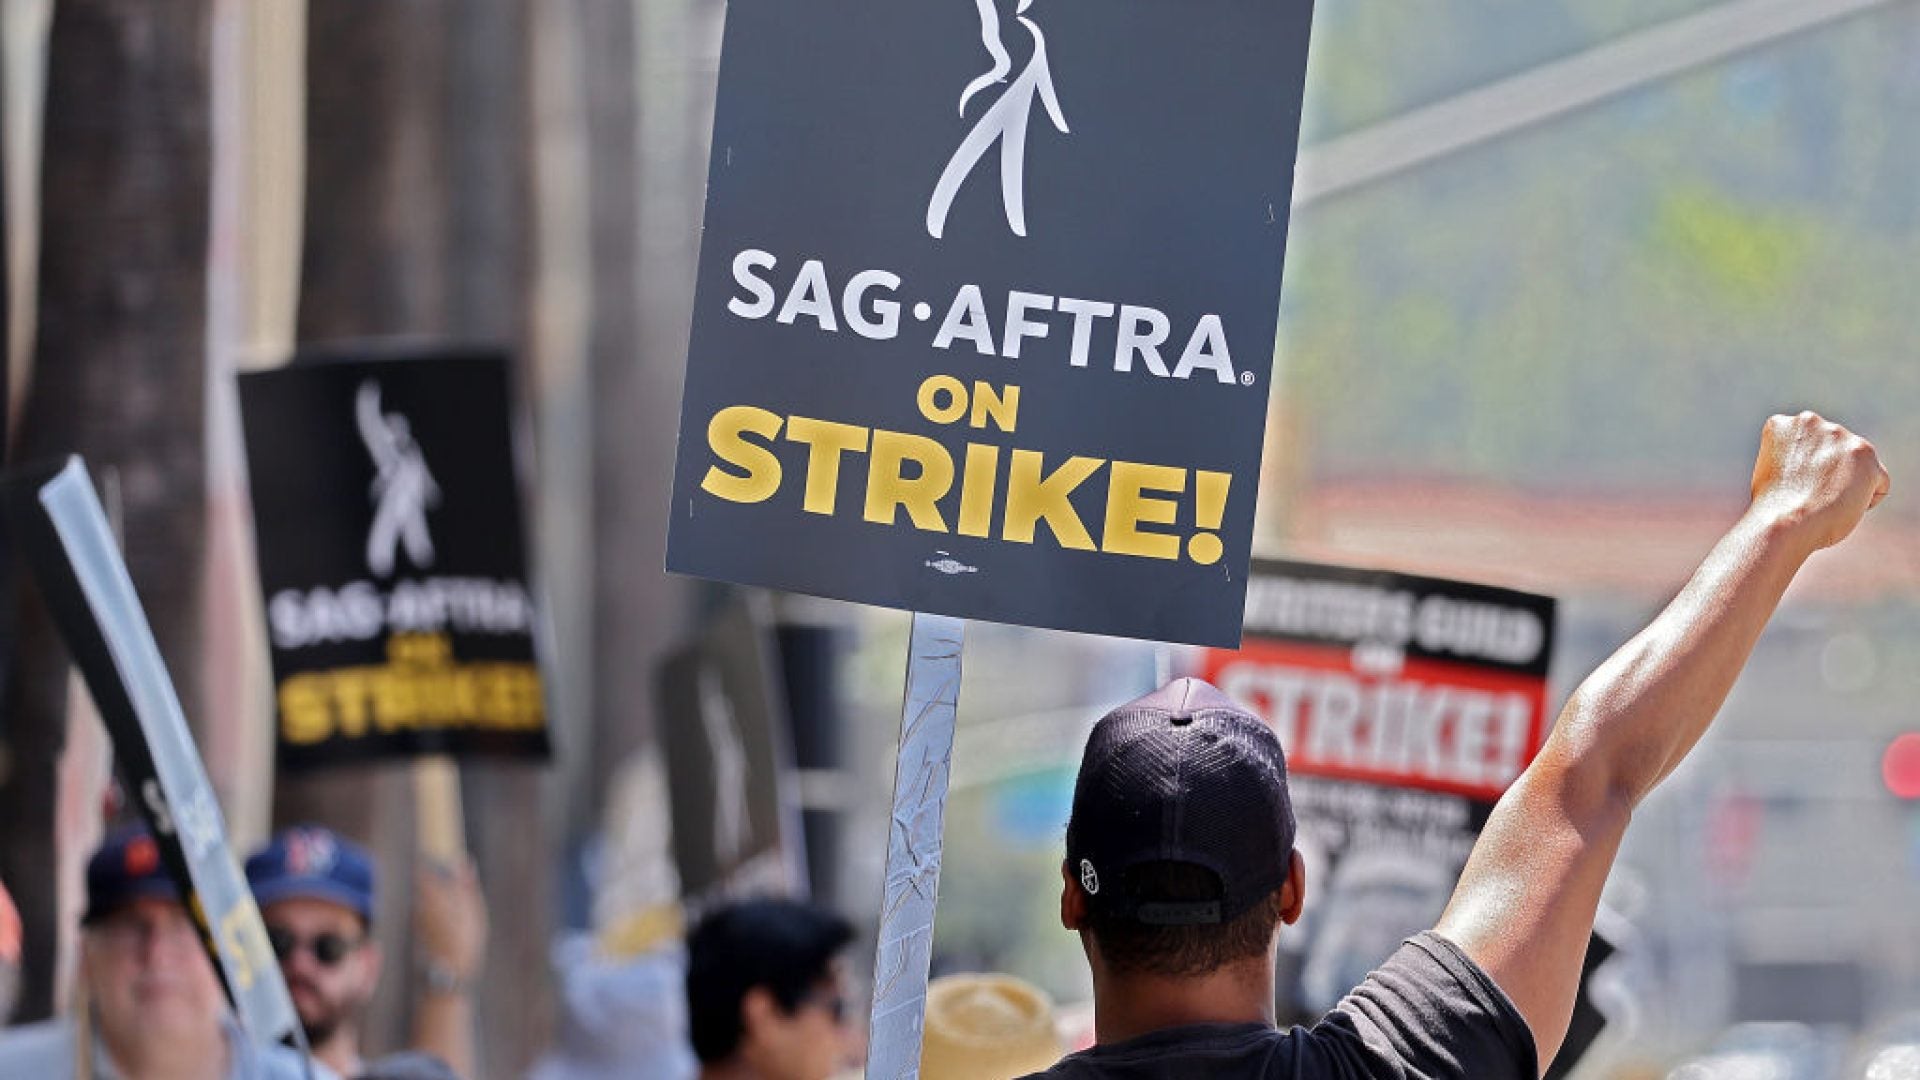 Here's How You Can Support The Black Writers And Actors On Strike